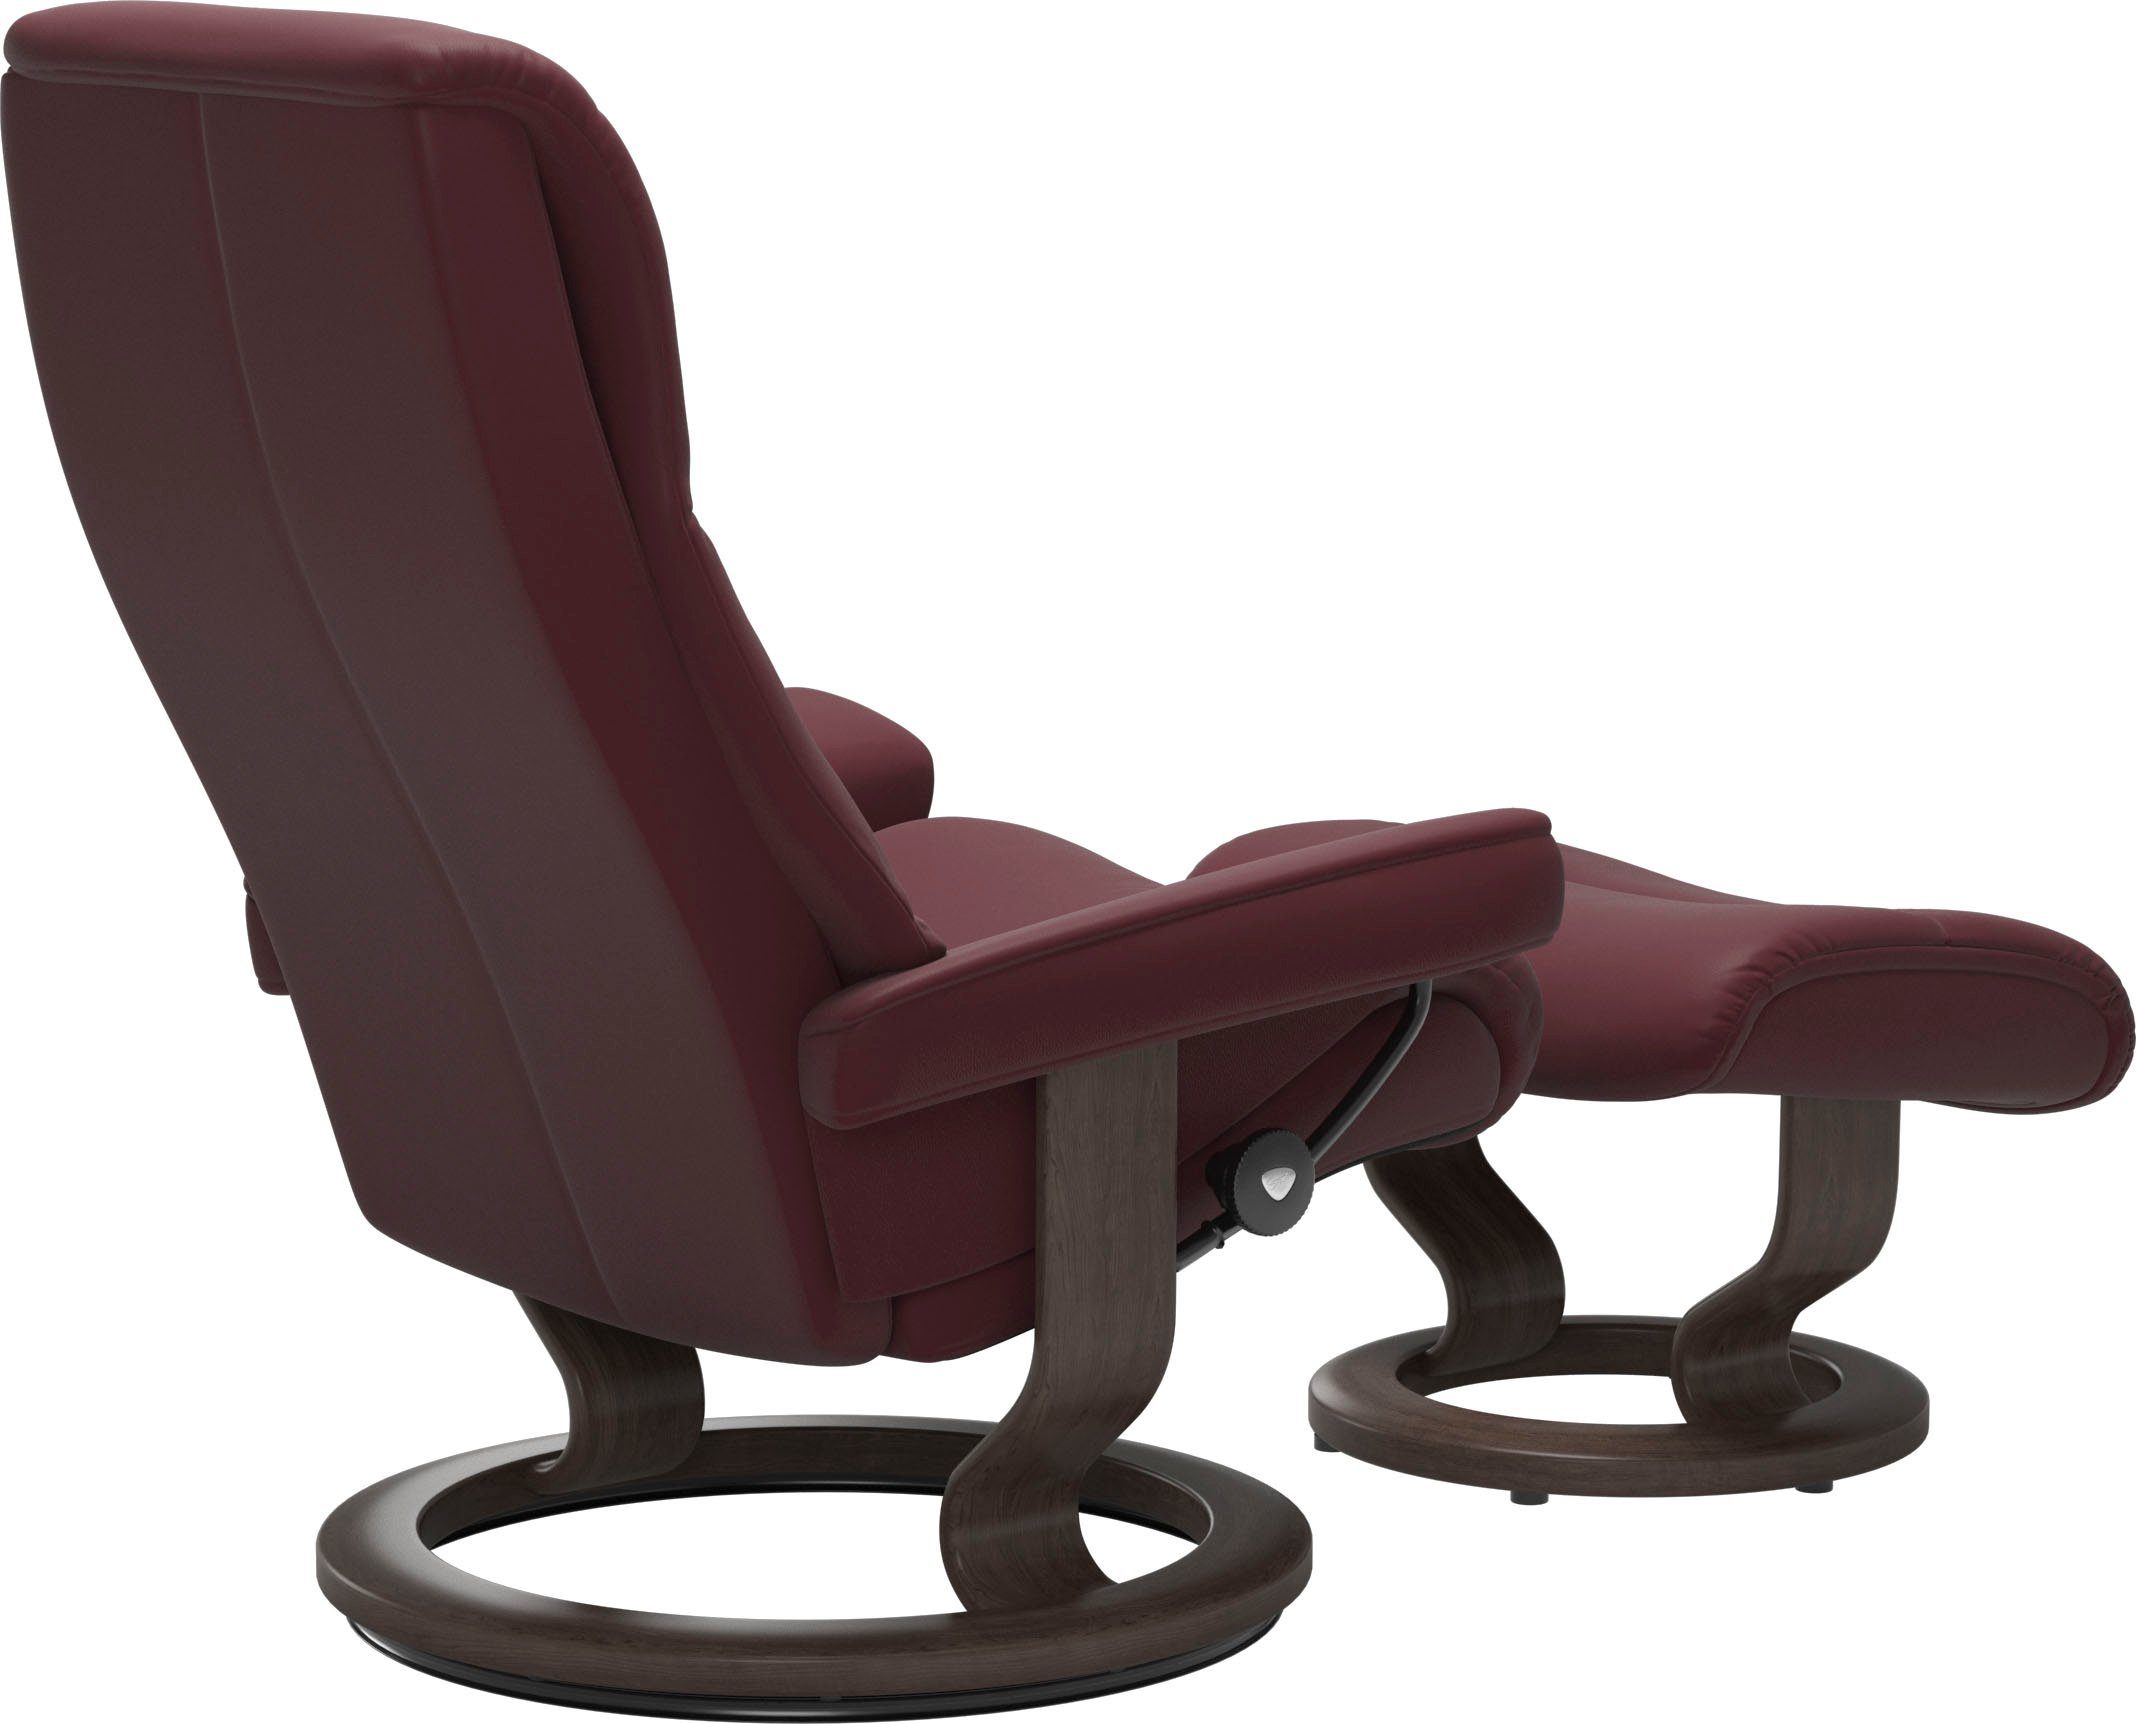 mit Relaxsessel View, Wenge Base, Classic Stressless® Größe M,Gestell